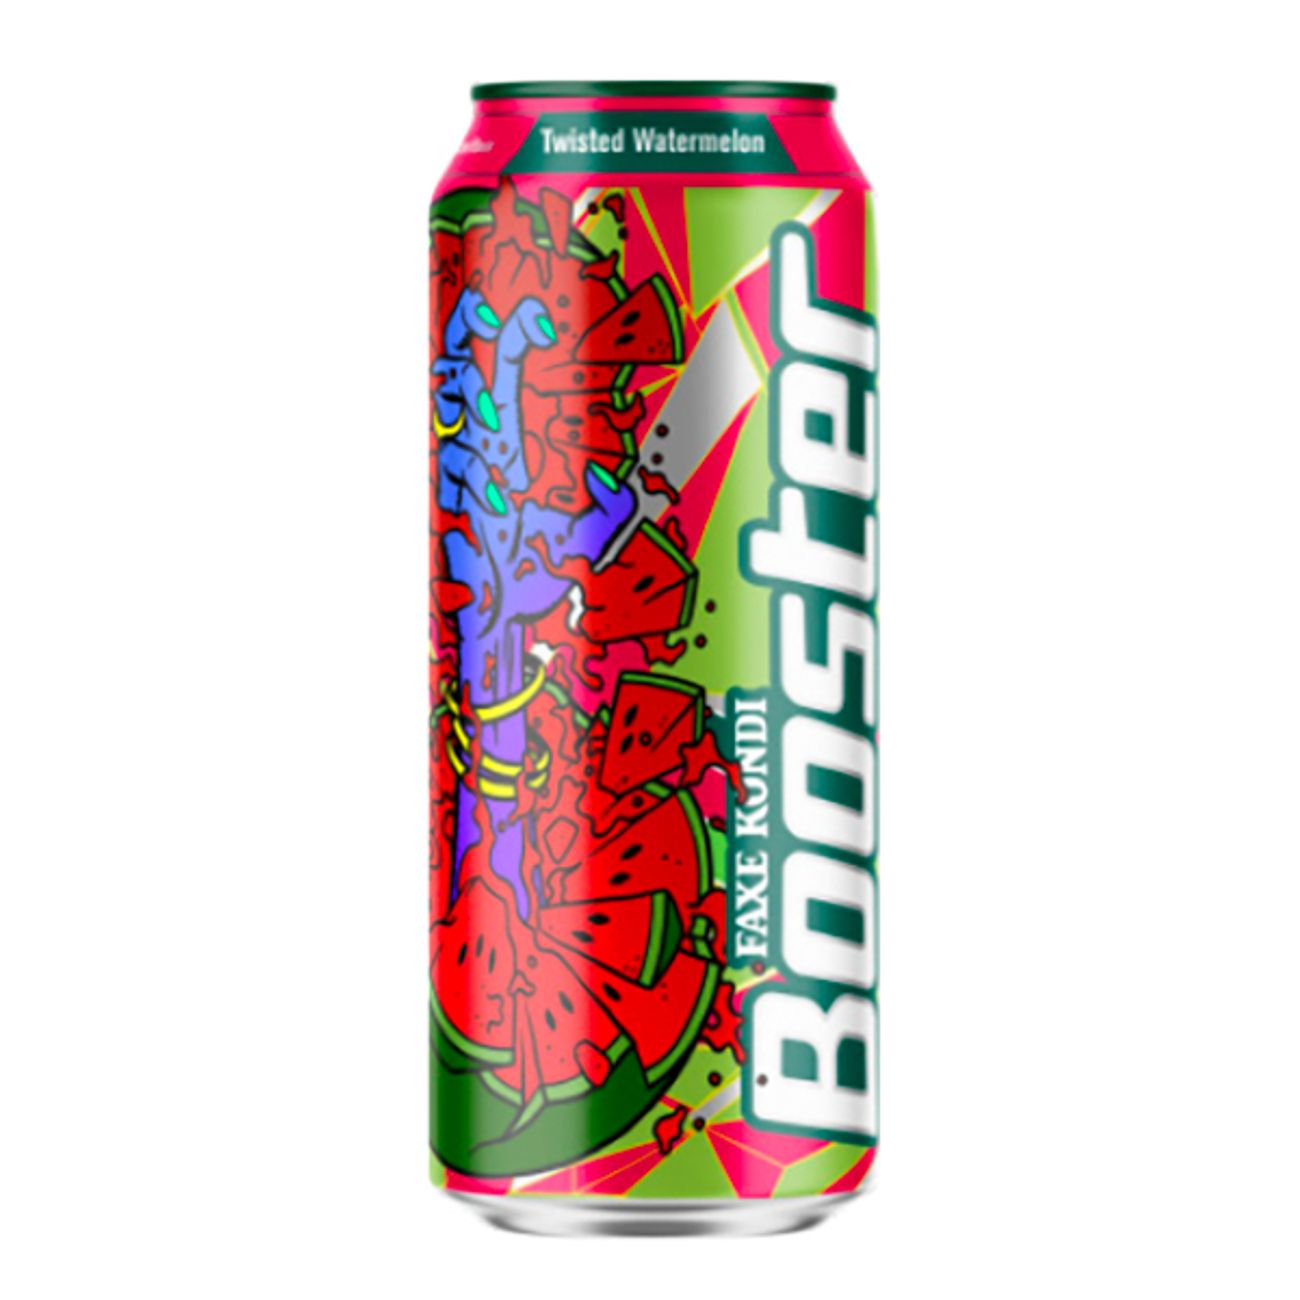 booster-watermelon-energy-drink-75130-1